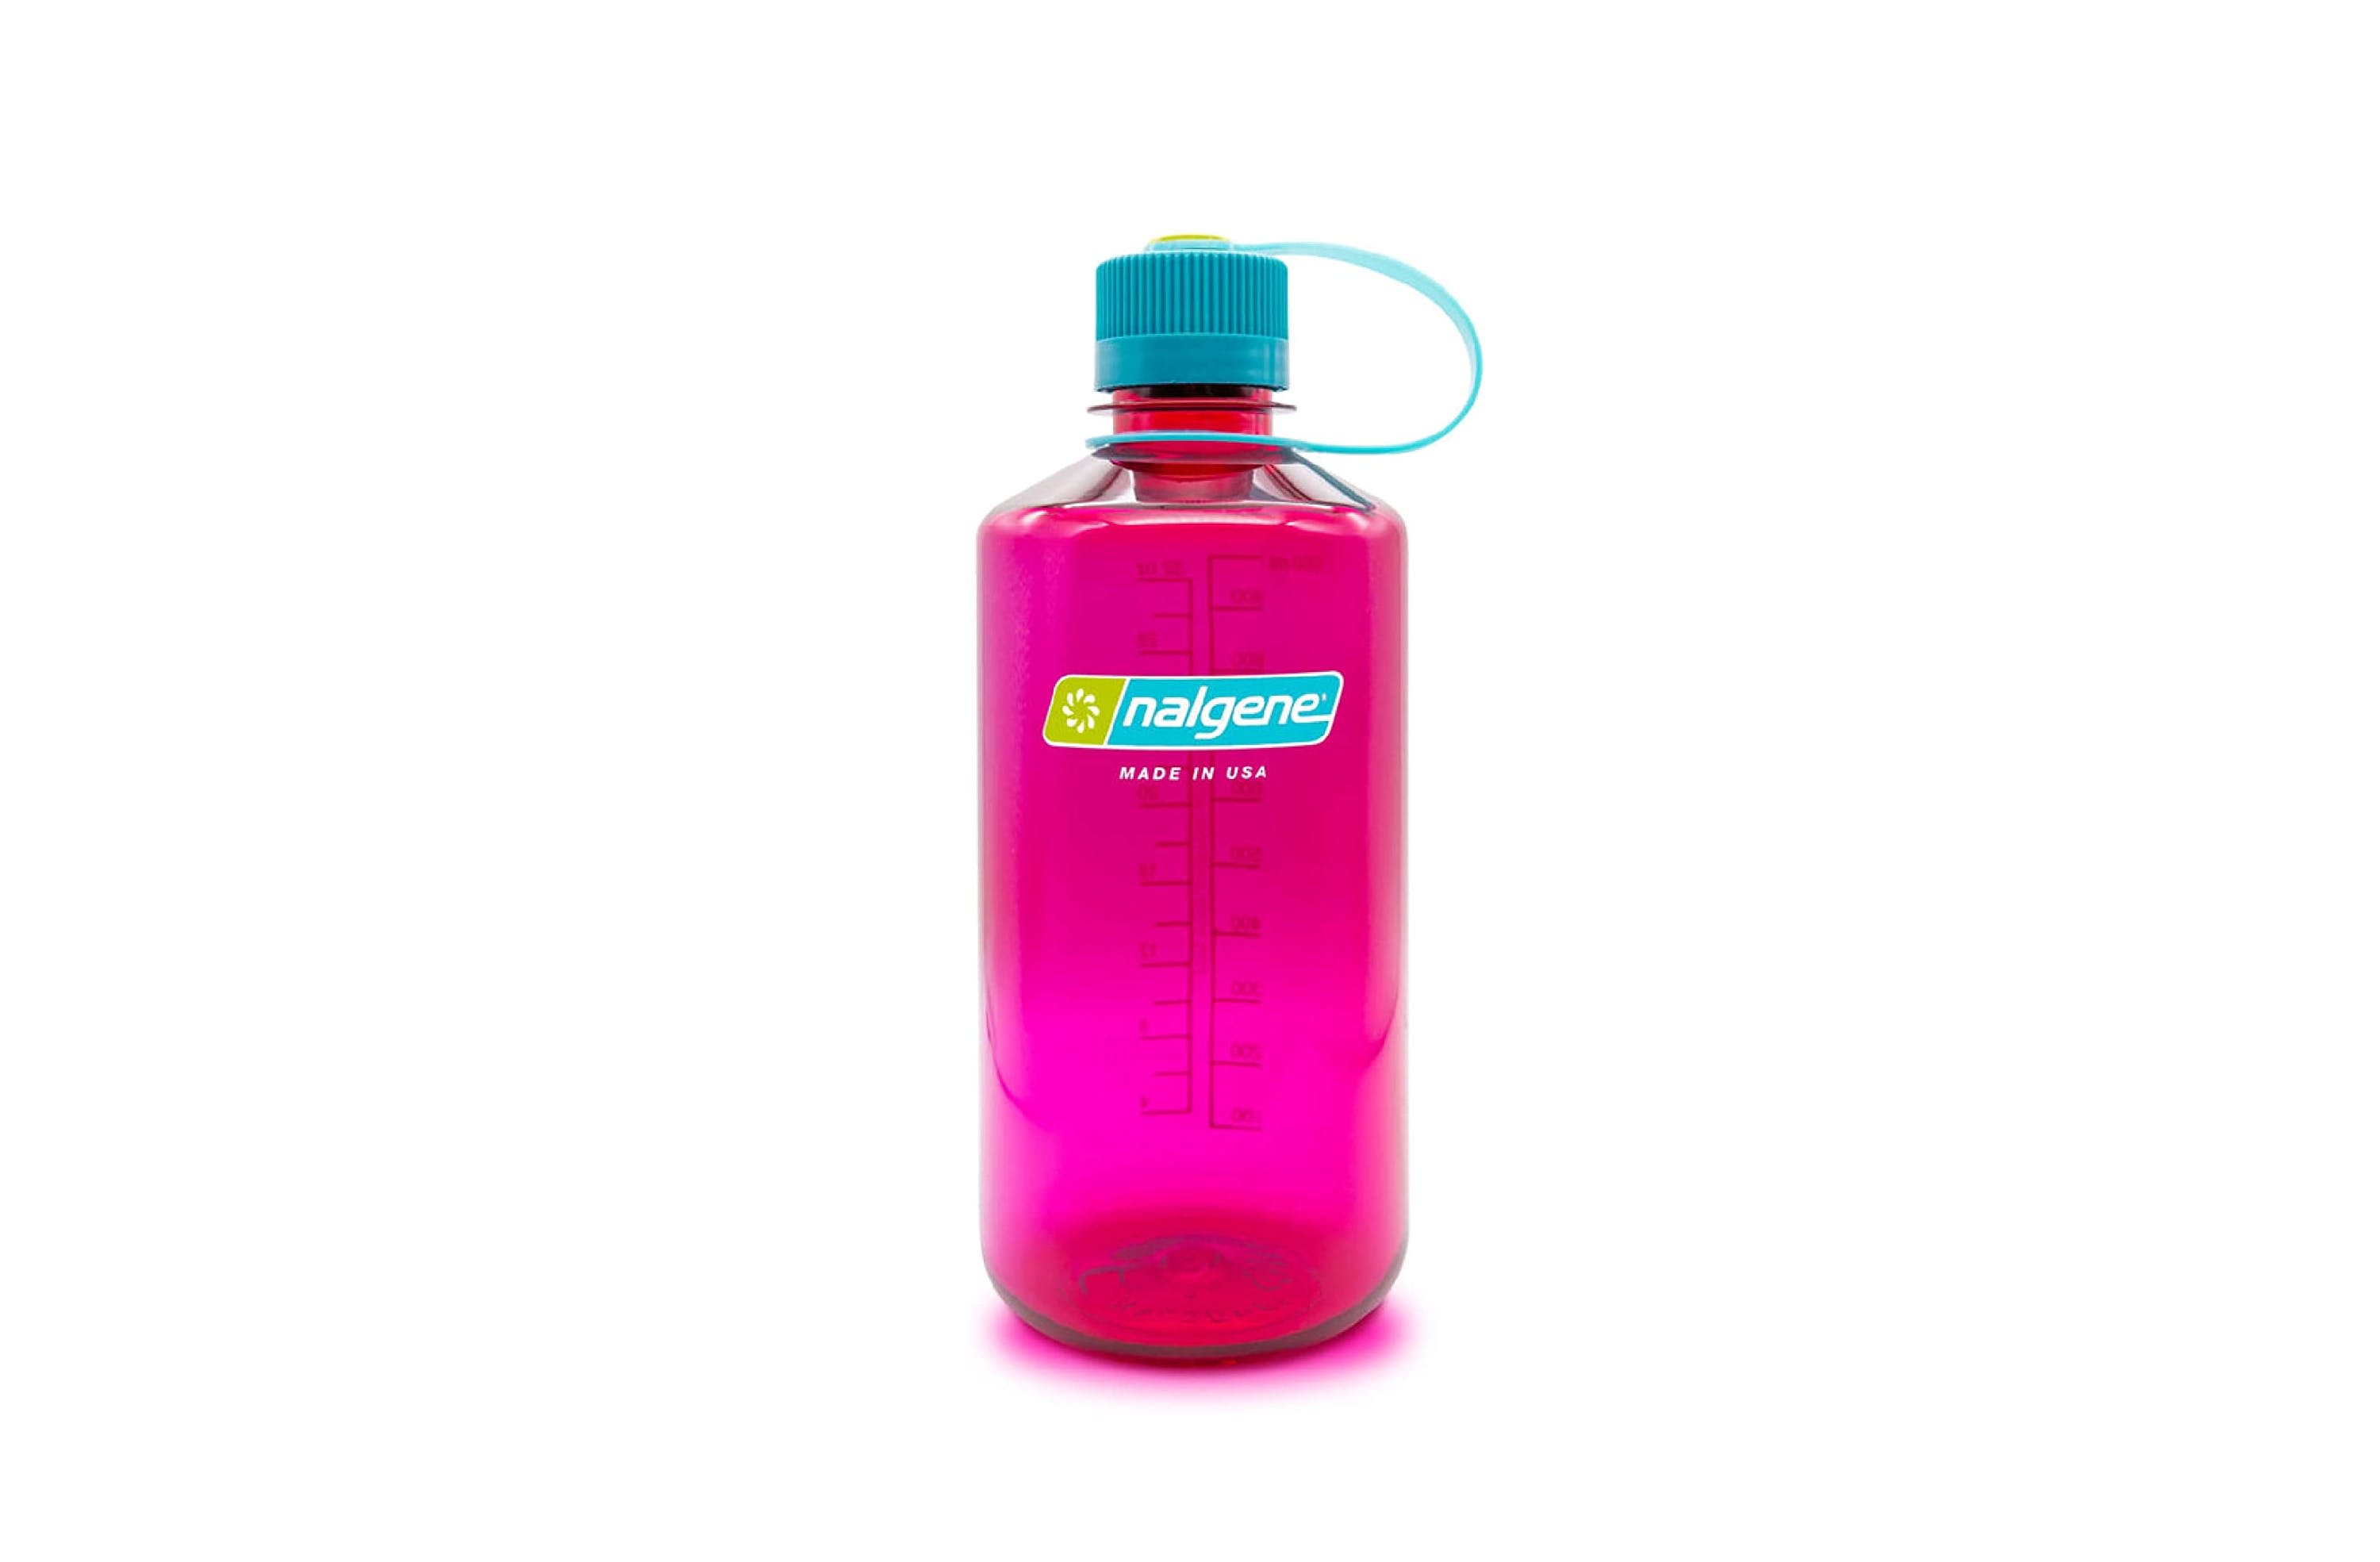 http://res.cloudinary.com/the-infatuation/image/upload/f_auto/q_auto/v1656122552/cms/features/best-water-bottles/Nalgene.jpg